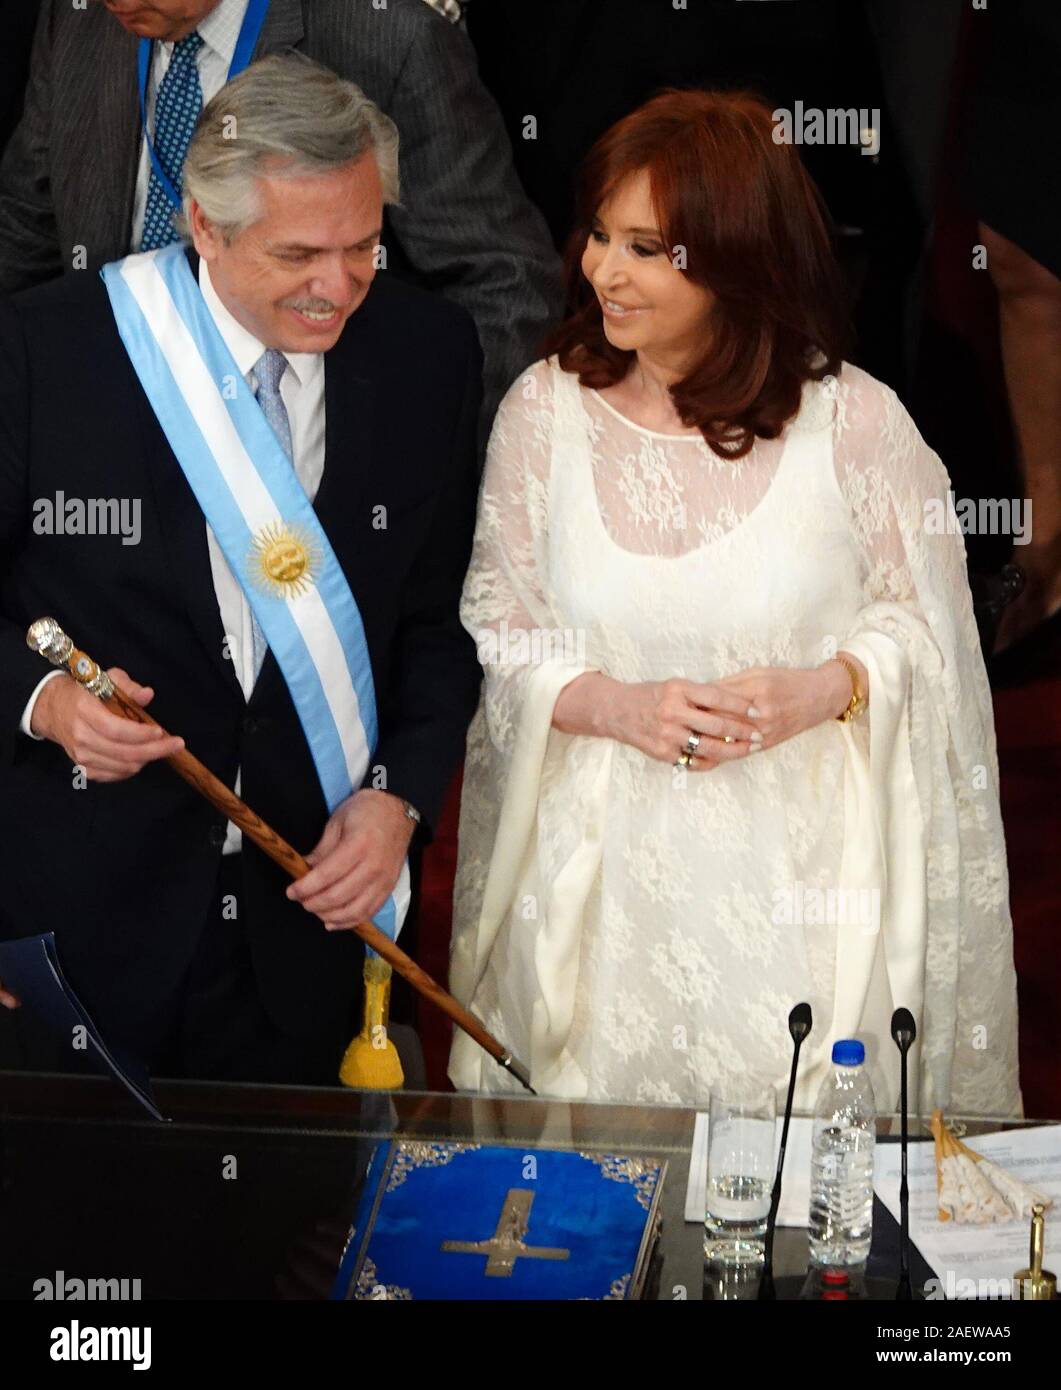 Buenos Aires, Argentina. 10th Dec, 2019. Alberto Fernandez (l), new President of Argentina, and Vice-President Cristina Fernandez de Kirchner stand together after taking the oath of office before the Congress. Credit: Florencia Martin/dpa/Alamy Live News Stock Photo